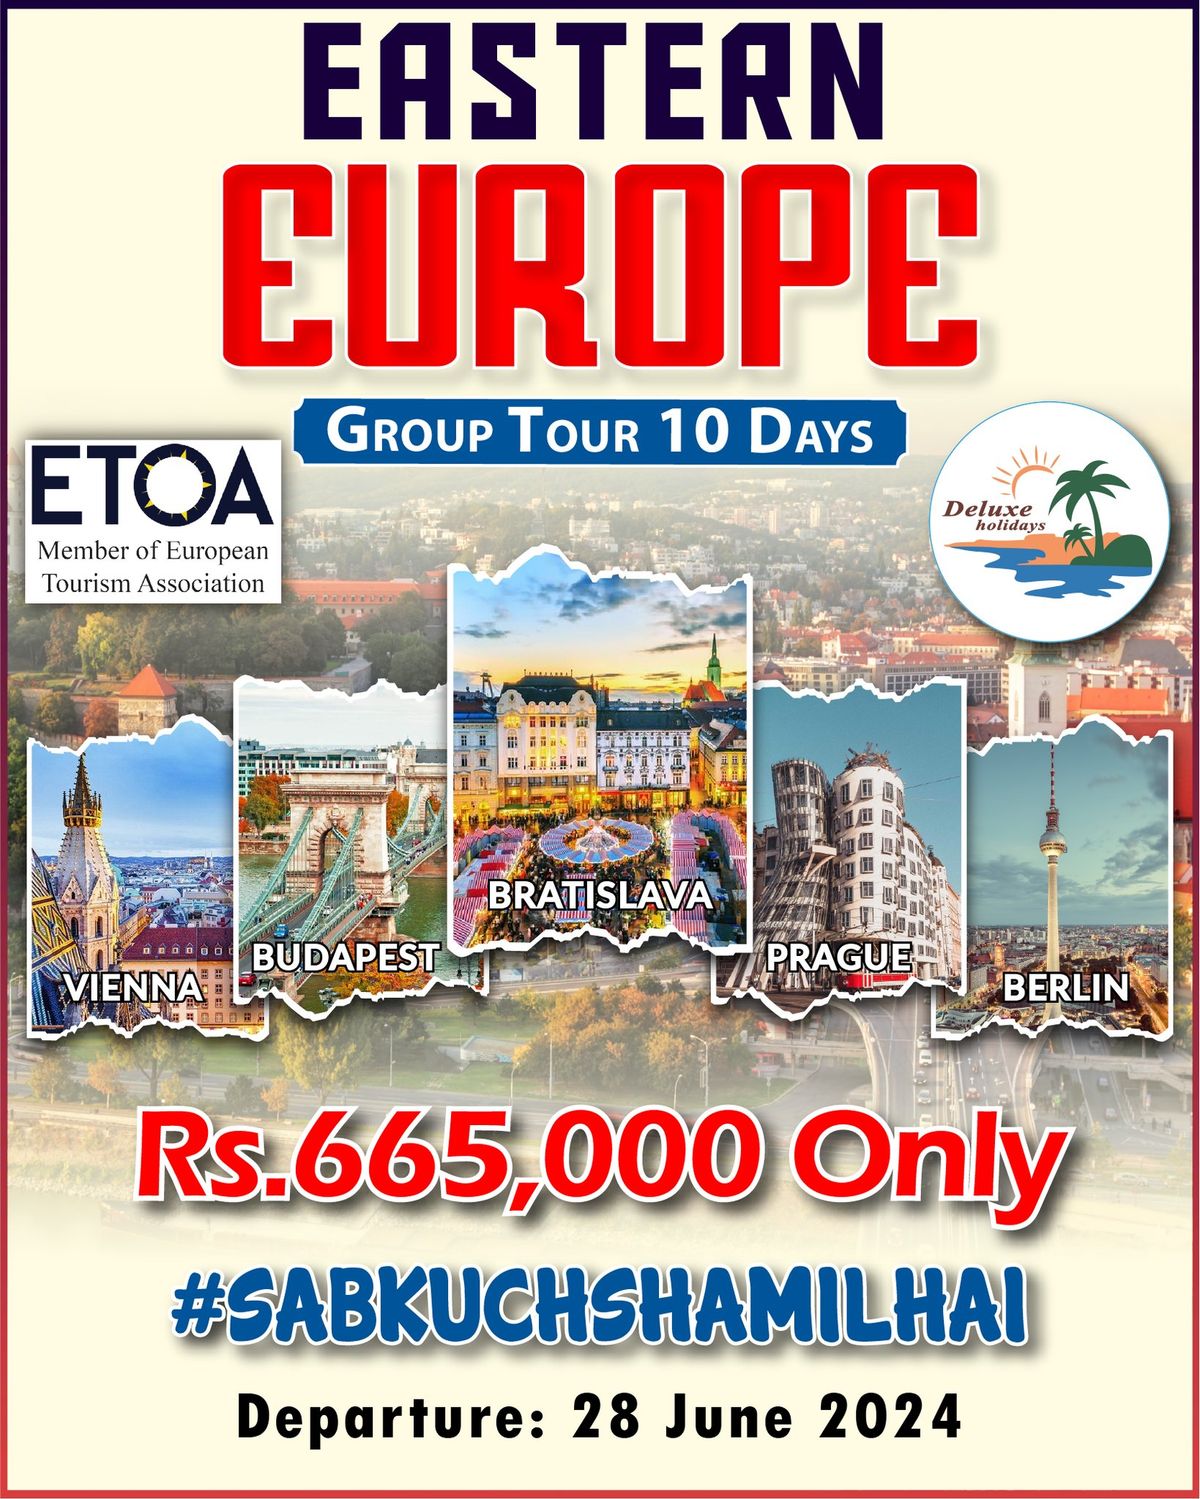 EASTERN EUROPE - 10 DAYS SPECIAL GROUP TOUR 